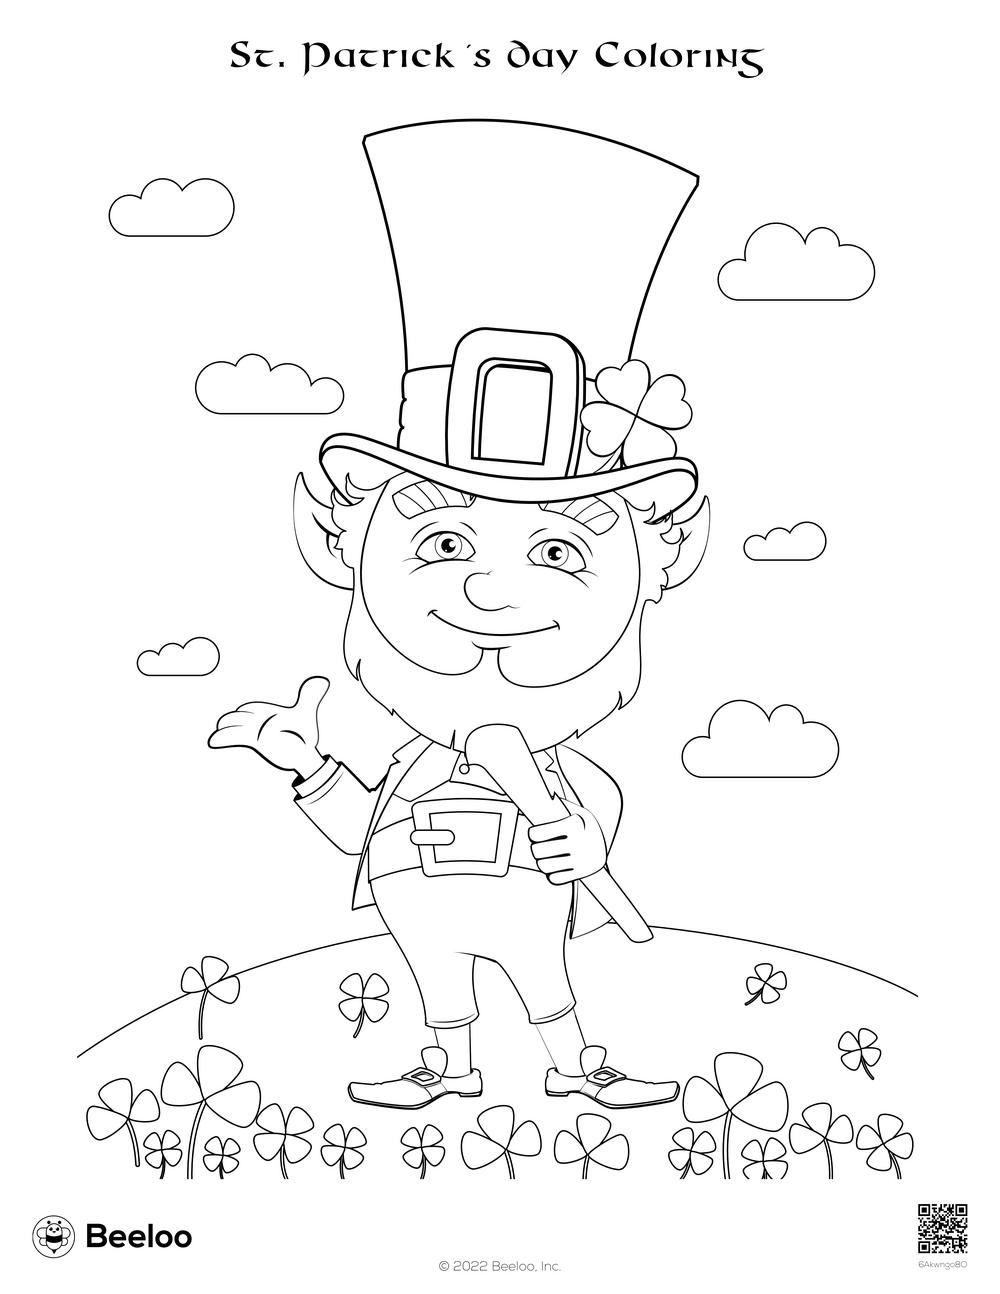 St patricks day coloring â printable crafts and activities for kids